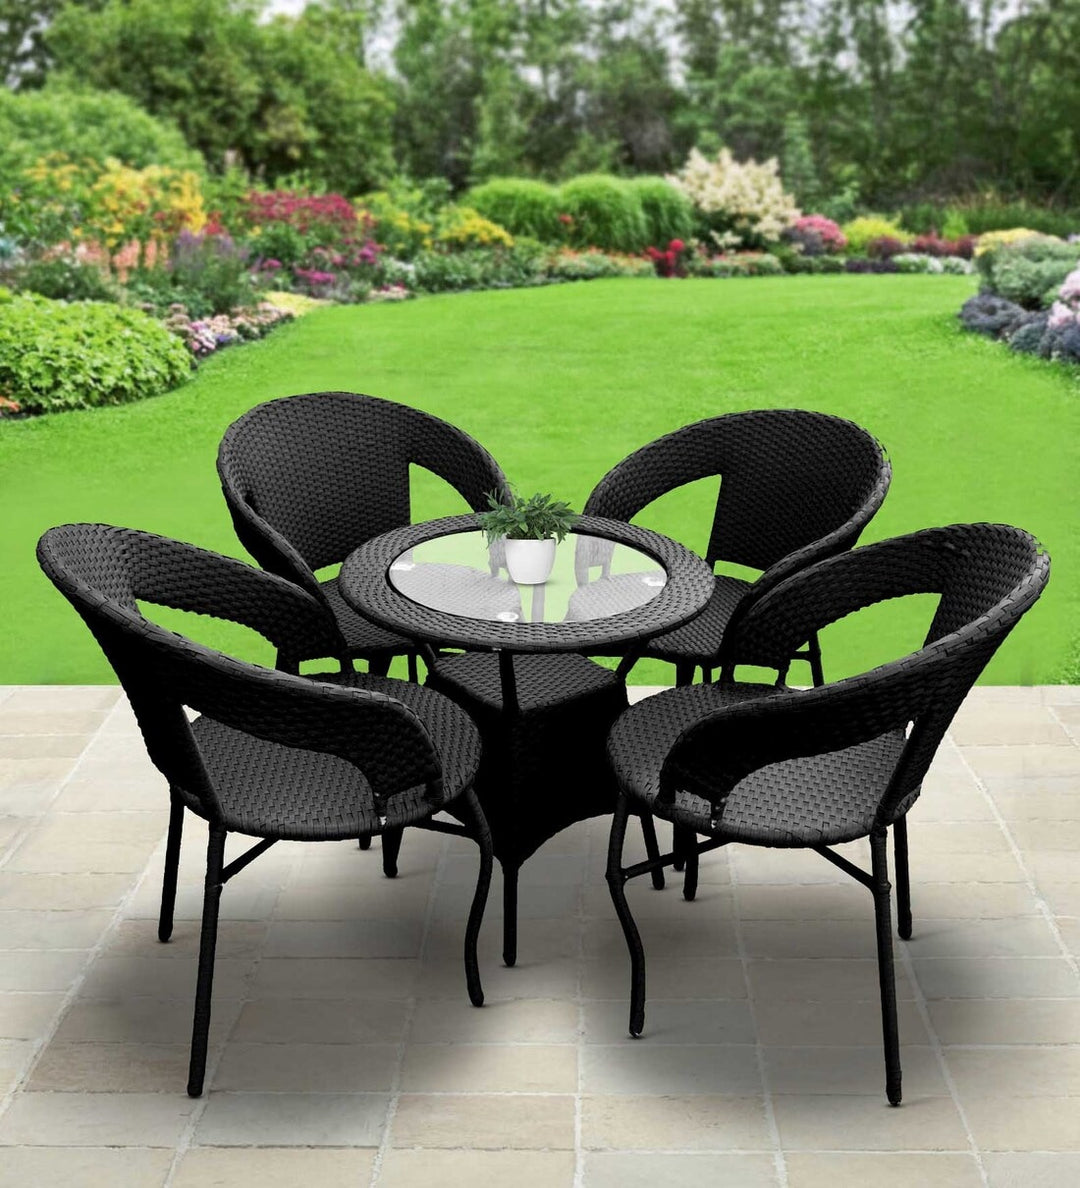 Dreamline Outdoor Furniture Garden Patio Seating Set 1+4 4 Chairs And Table  Set Balcony Furniture Coffee Table Set (Black) – Dreamlineoutdoorfurniture